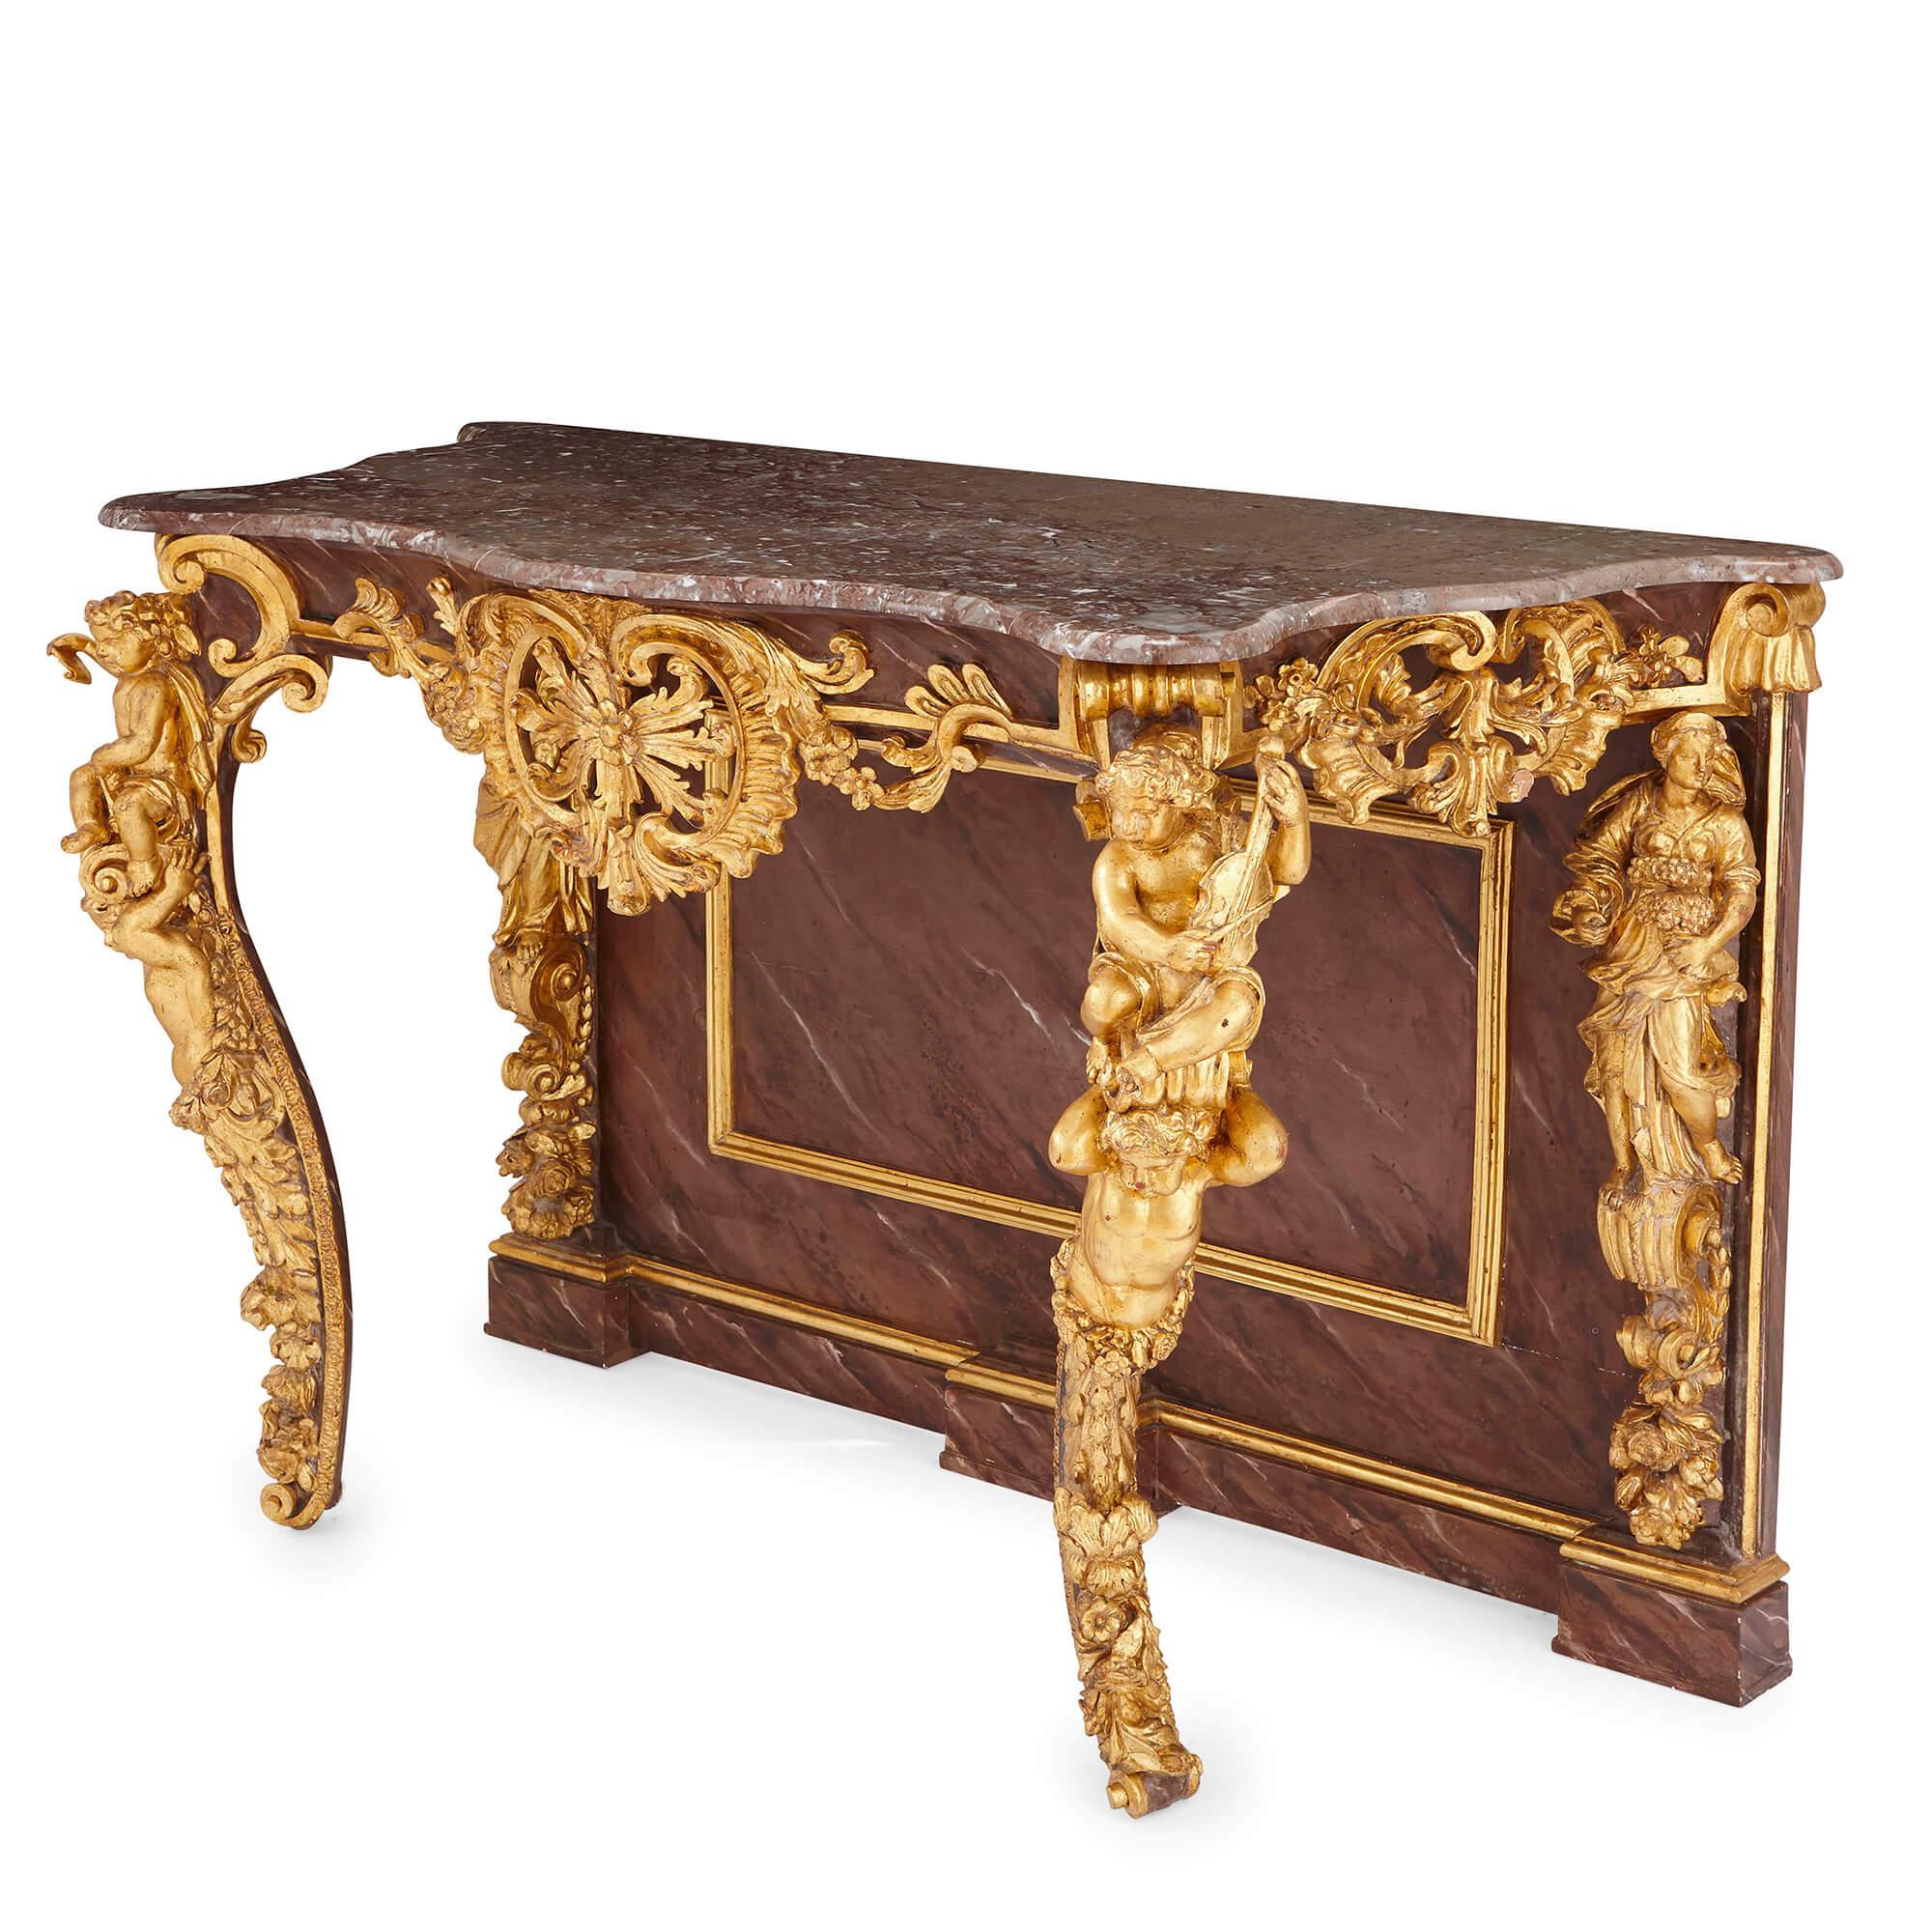 Pair of Rococo style Italian giltwood and marble pier tables
Italian, 19th Century
Measures: Height 93cm, width 130cm, depth 65cm

These exceptional pier tables are designed in the Louis XV style. The tables are crafted from giltwood, marble,